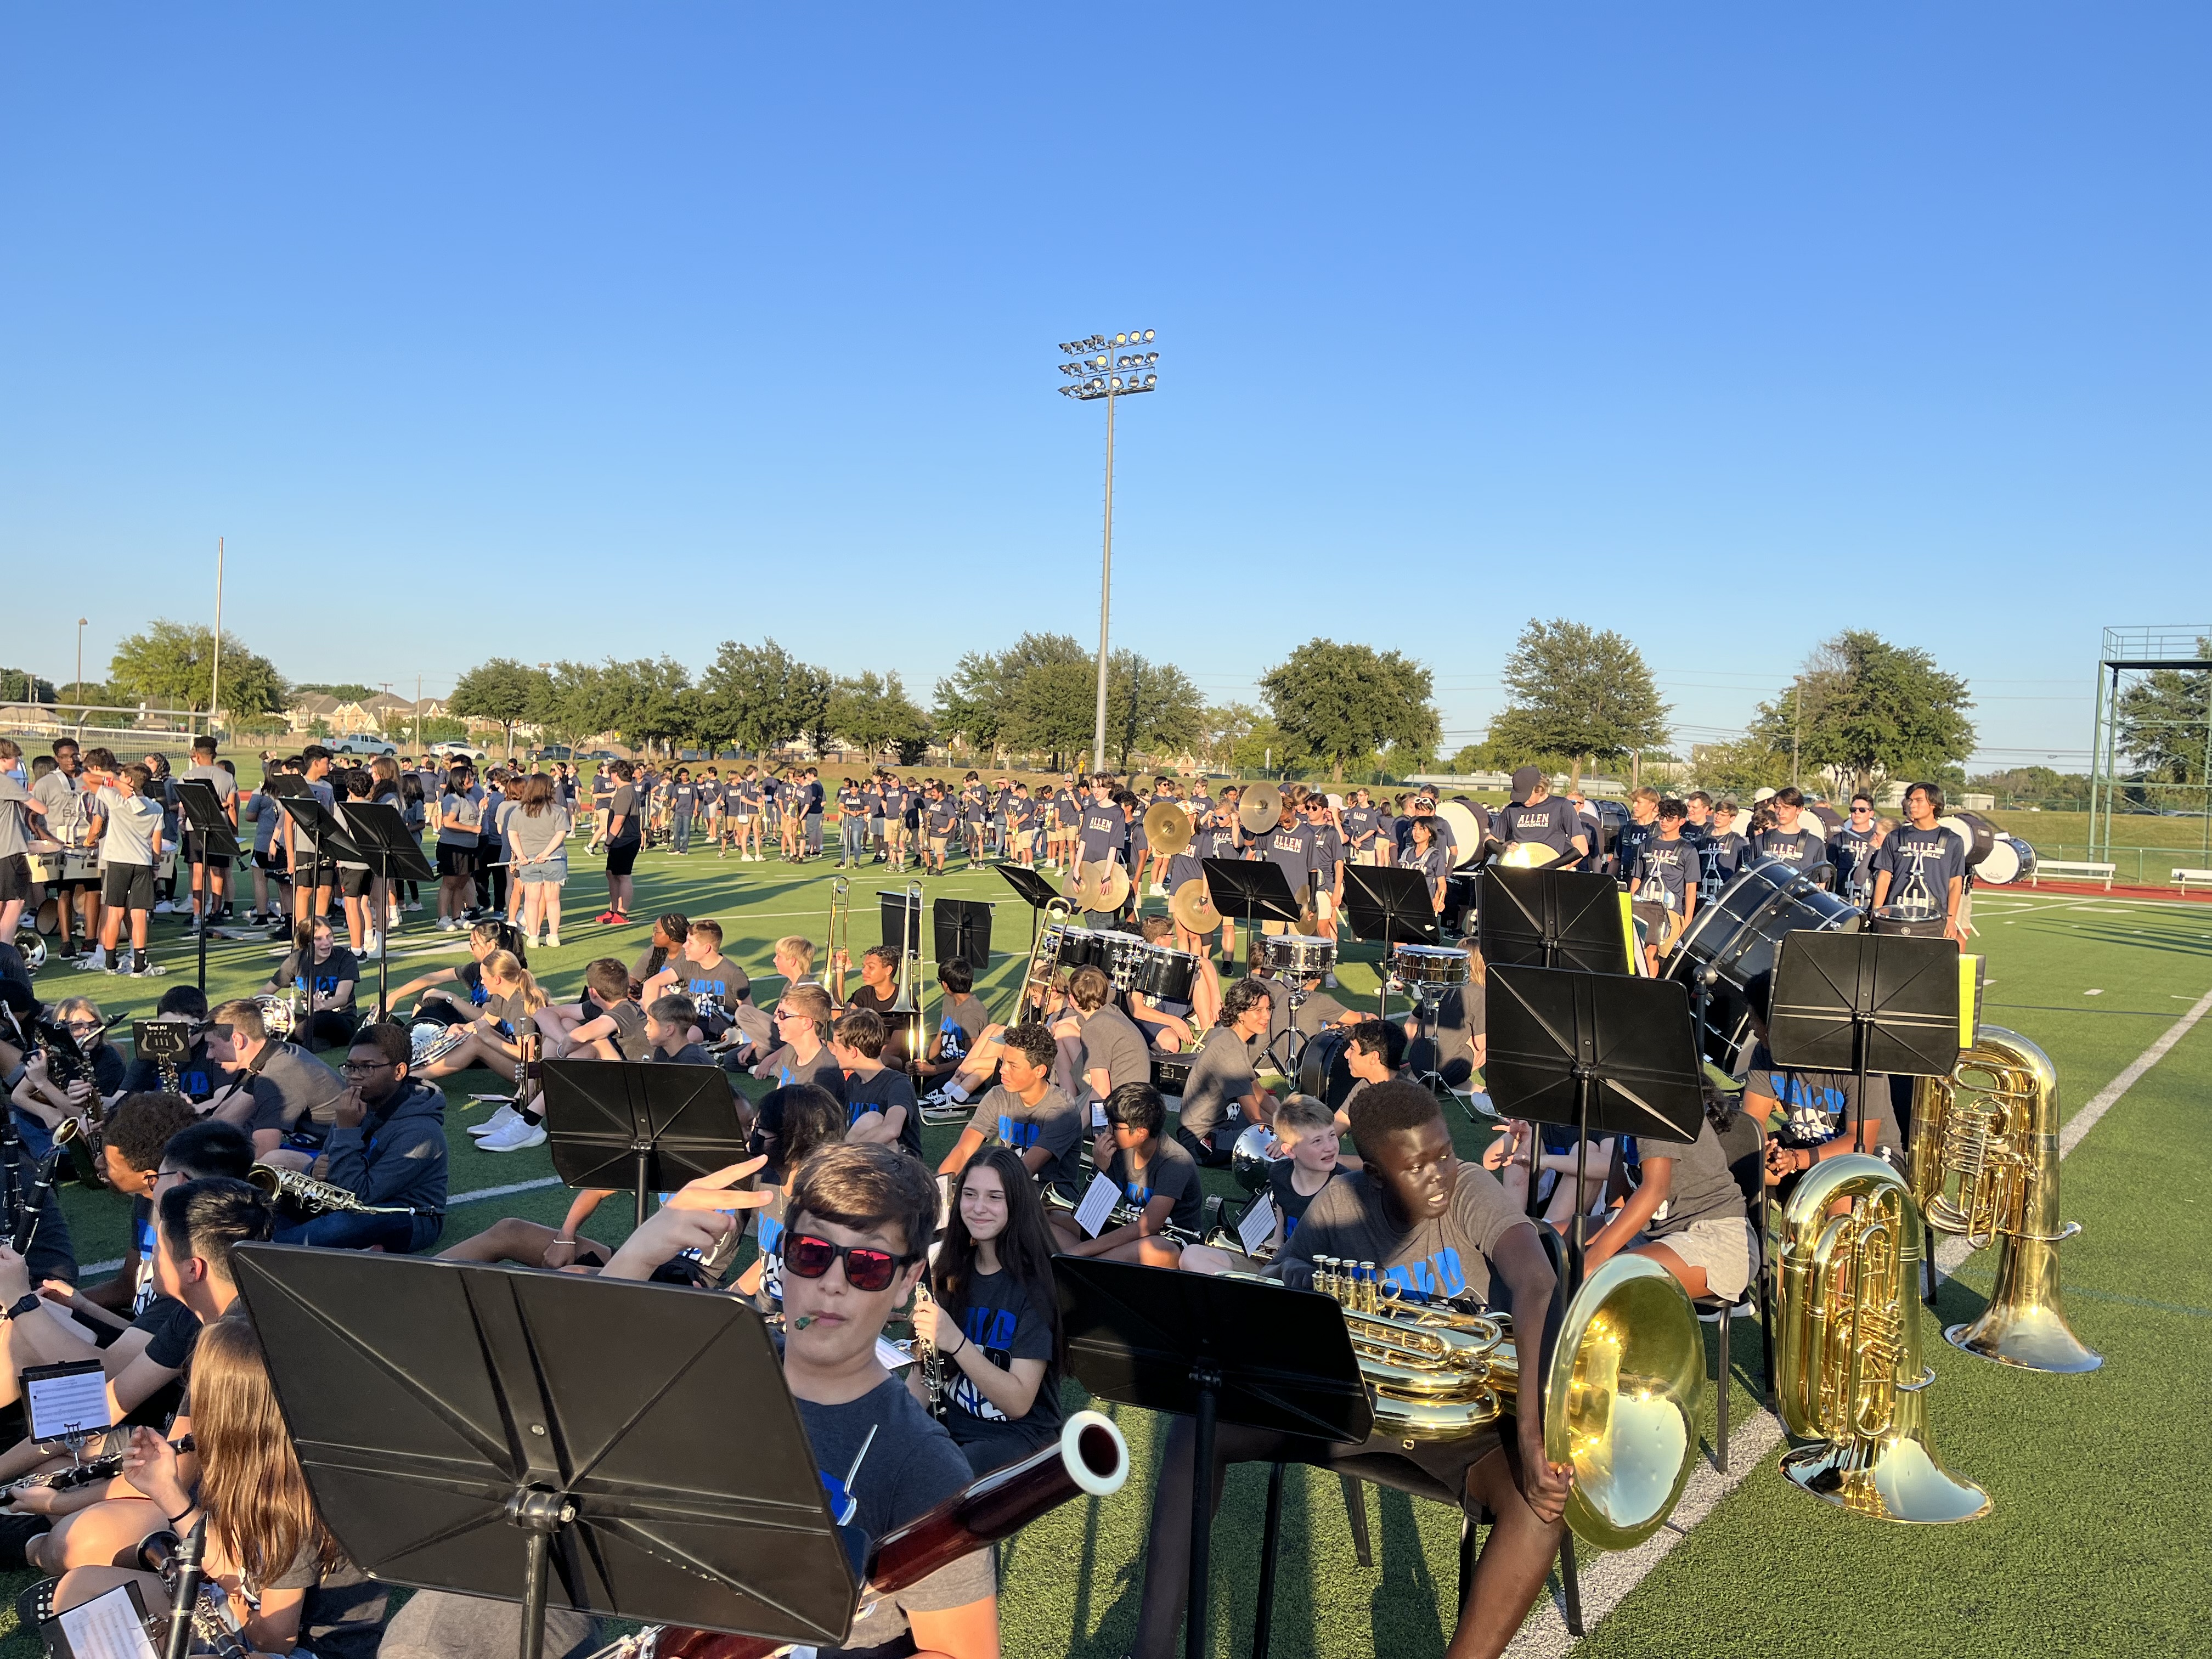 Members of the 8th Grade Band at their Tailgate Performance